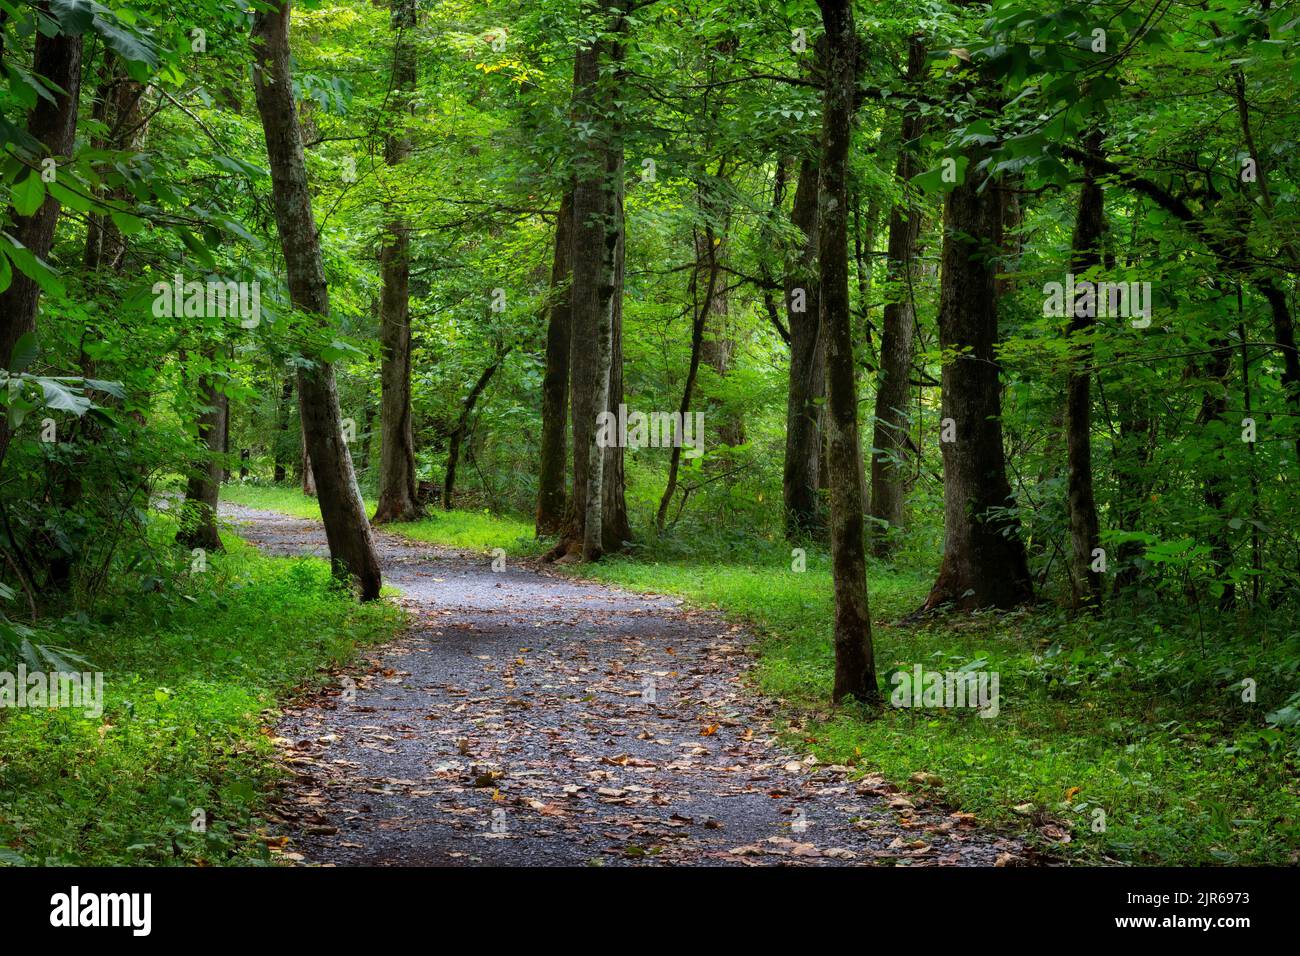 Graveled foot path leads through a wooded area along the South Houlston River in Bristrol, Tennessee Stock Photo